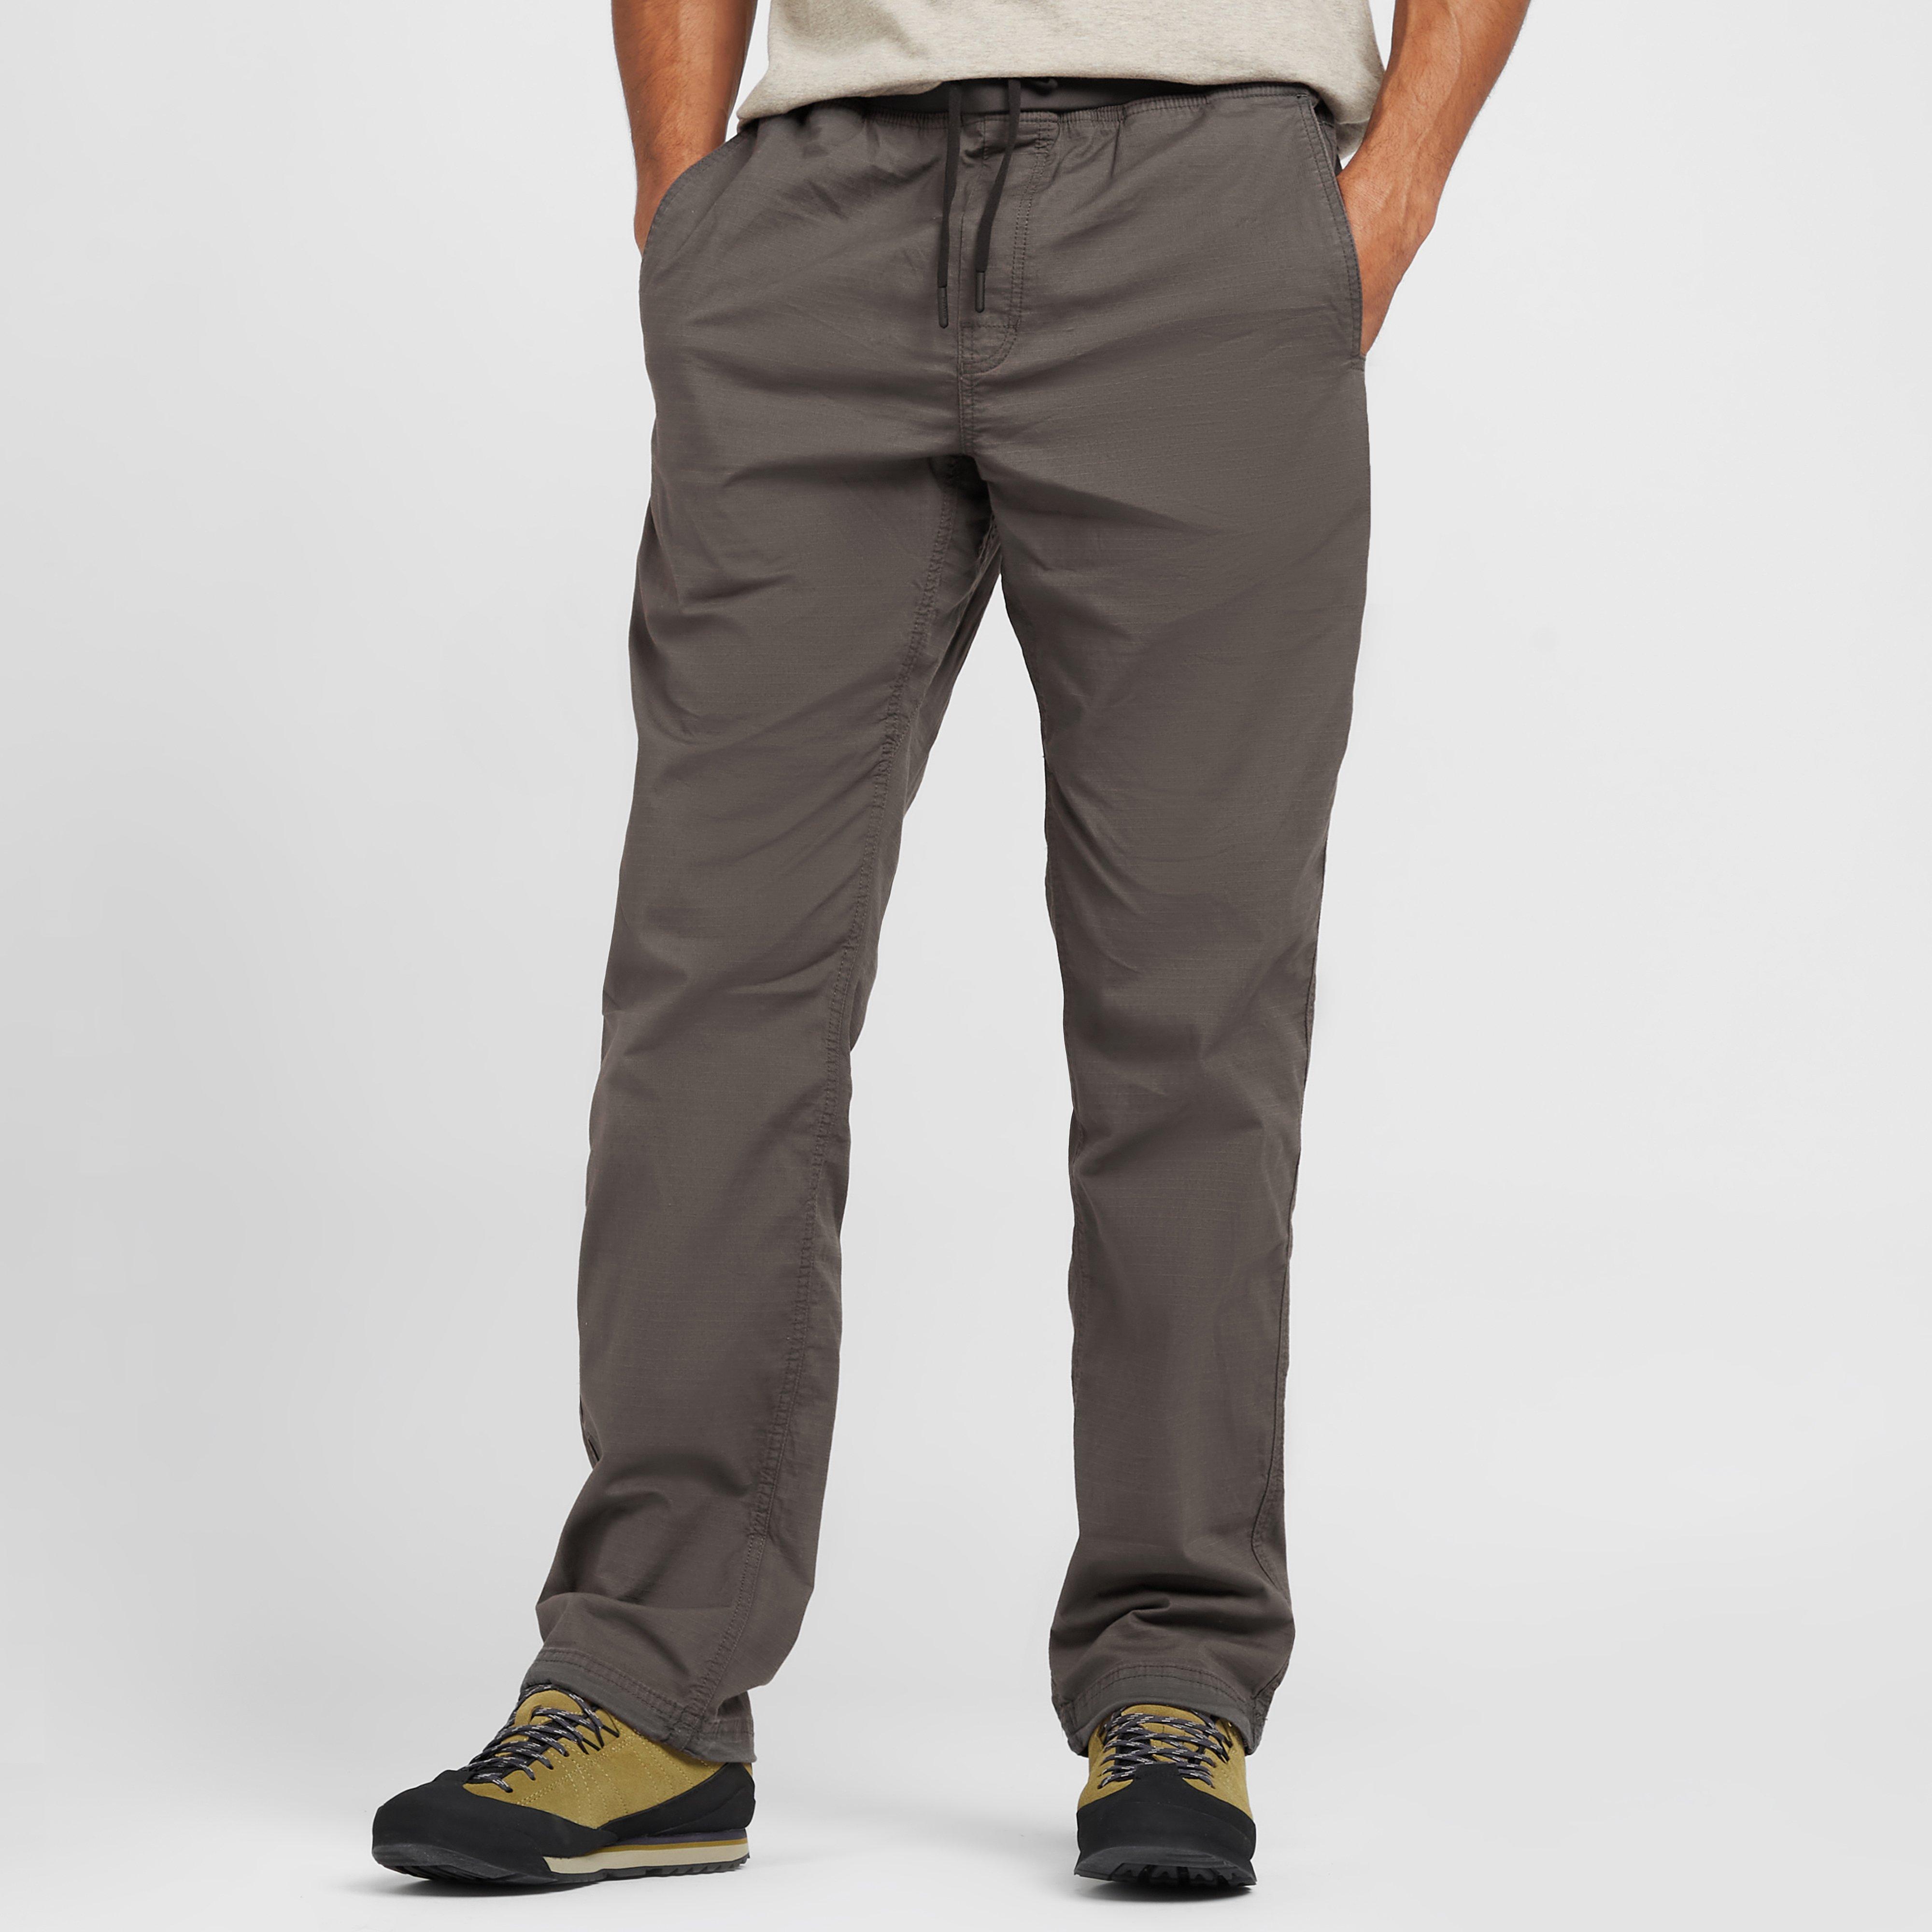 Prana Mens Moaby Pants - Gry/gry  Gry/gry